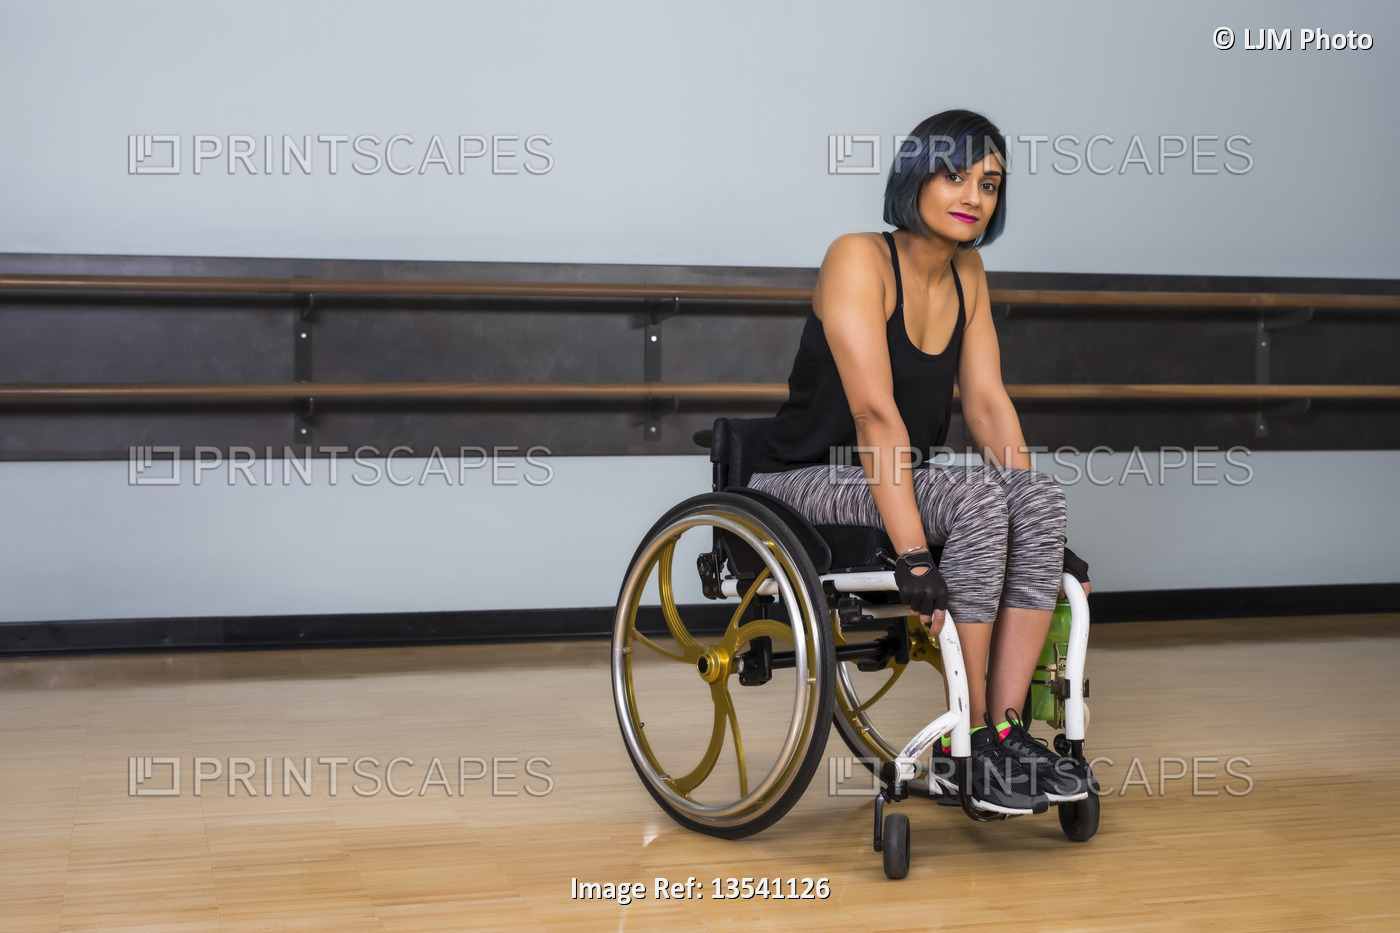 A paraplegic woman taking a break in a gymnasium after working out in a ...